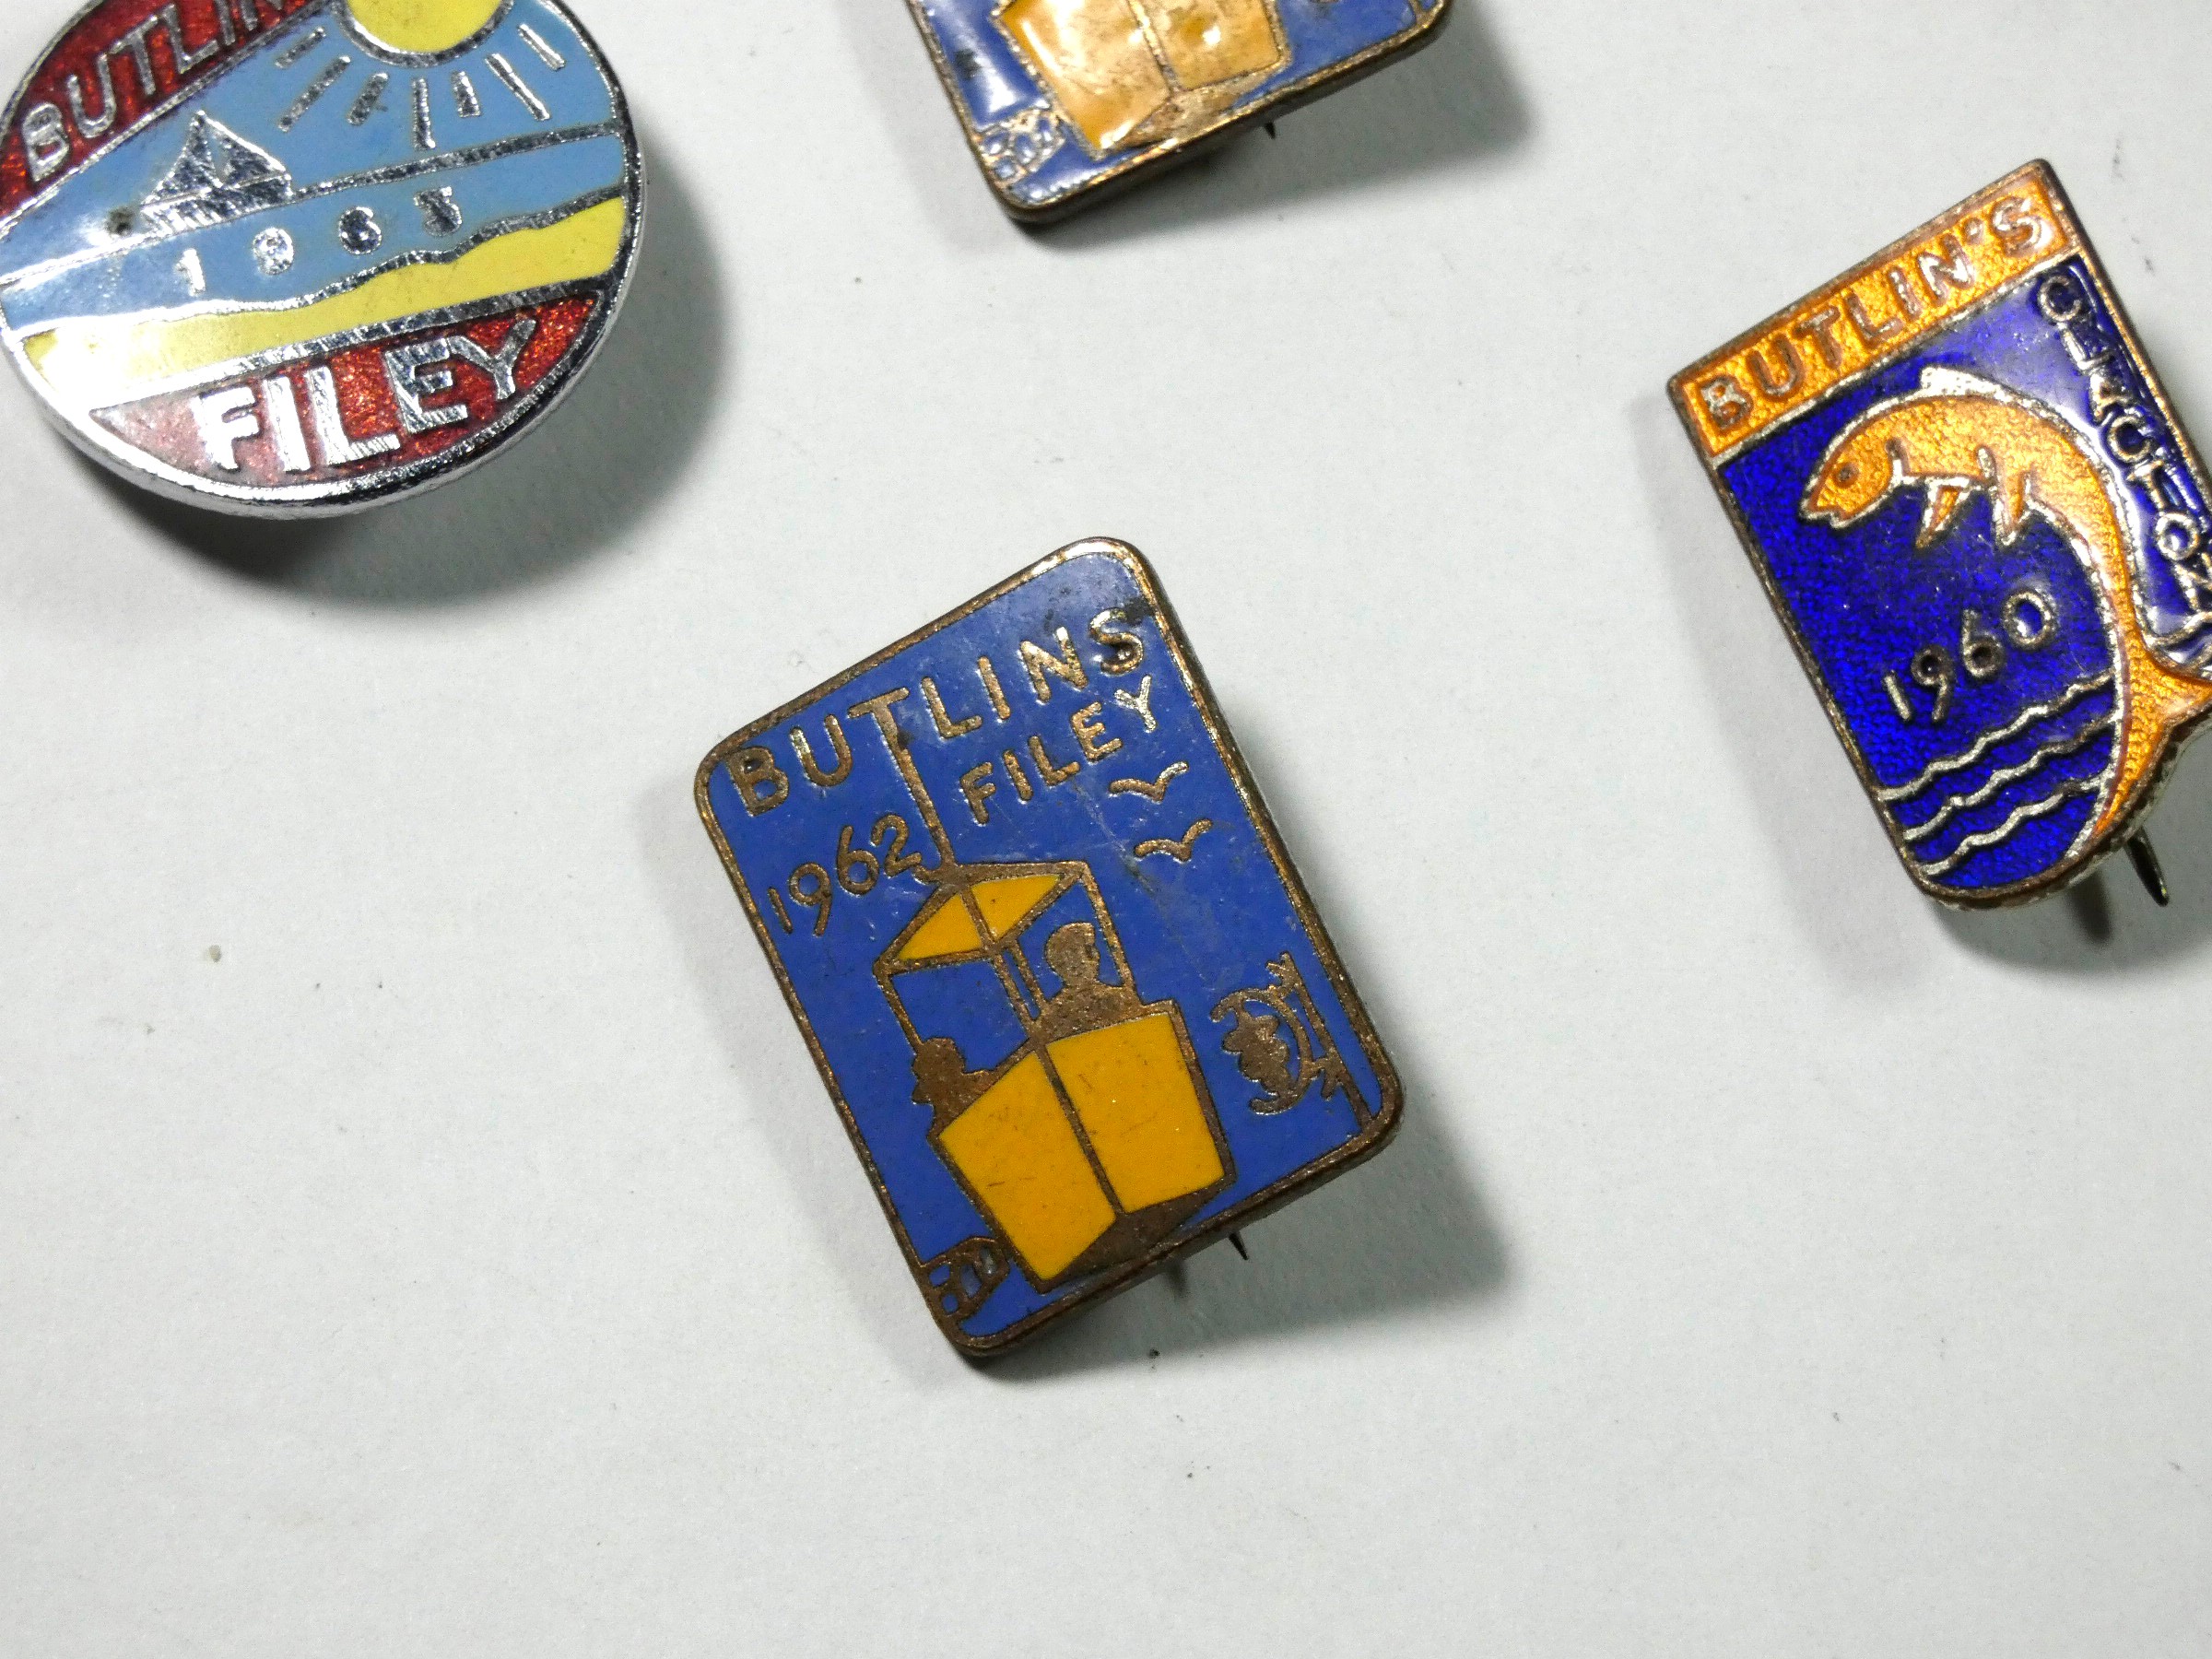 A collection of 17 Butlins metal and enamel badges, including Filey 1946, 47, 48, 62 x 4, 63 and 64, - Image 4 of 4